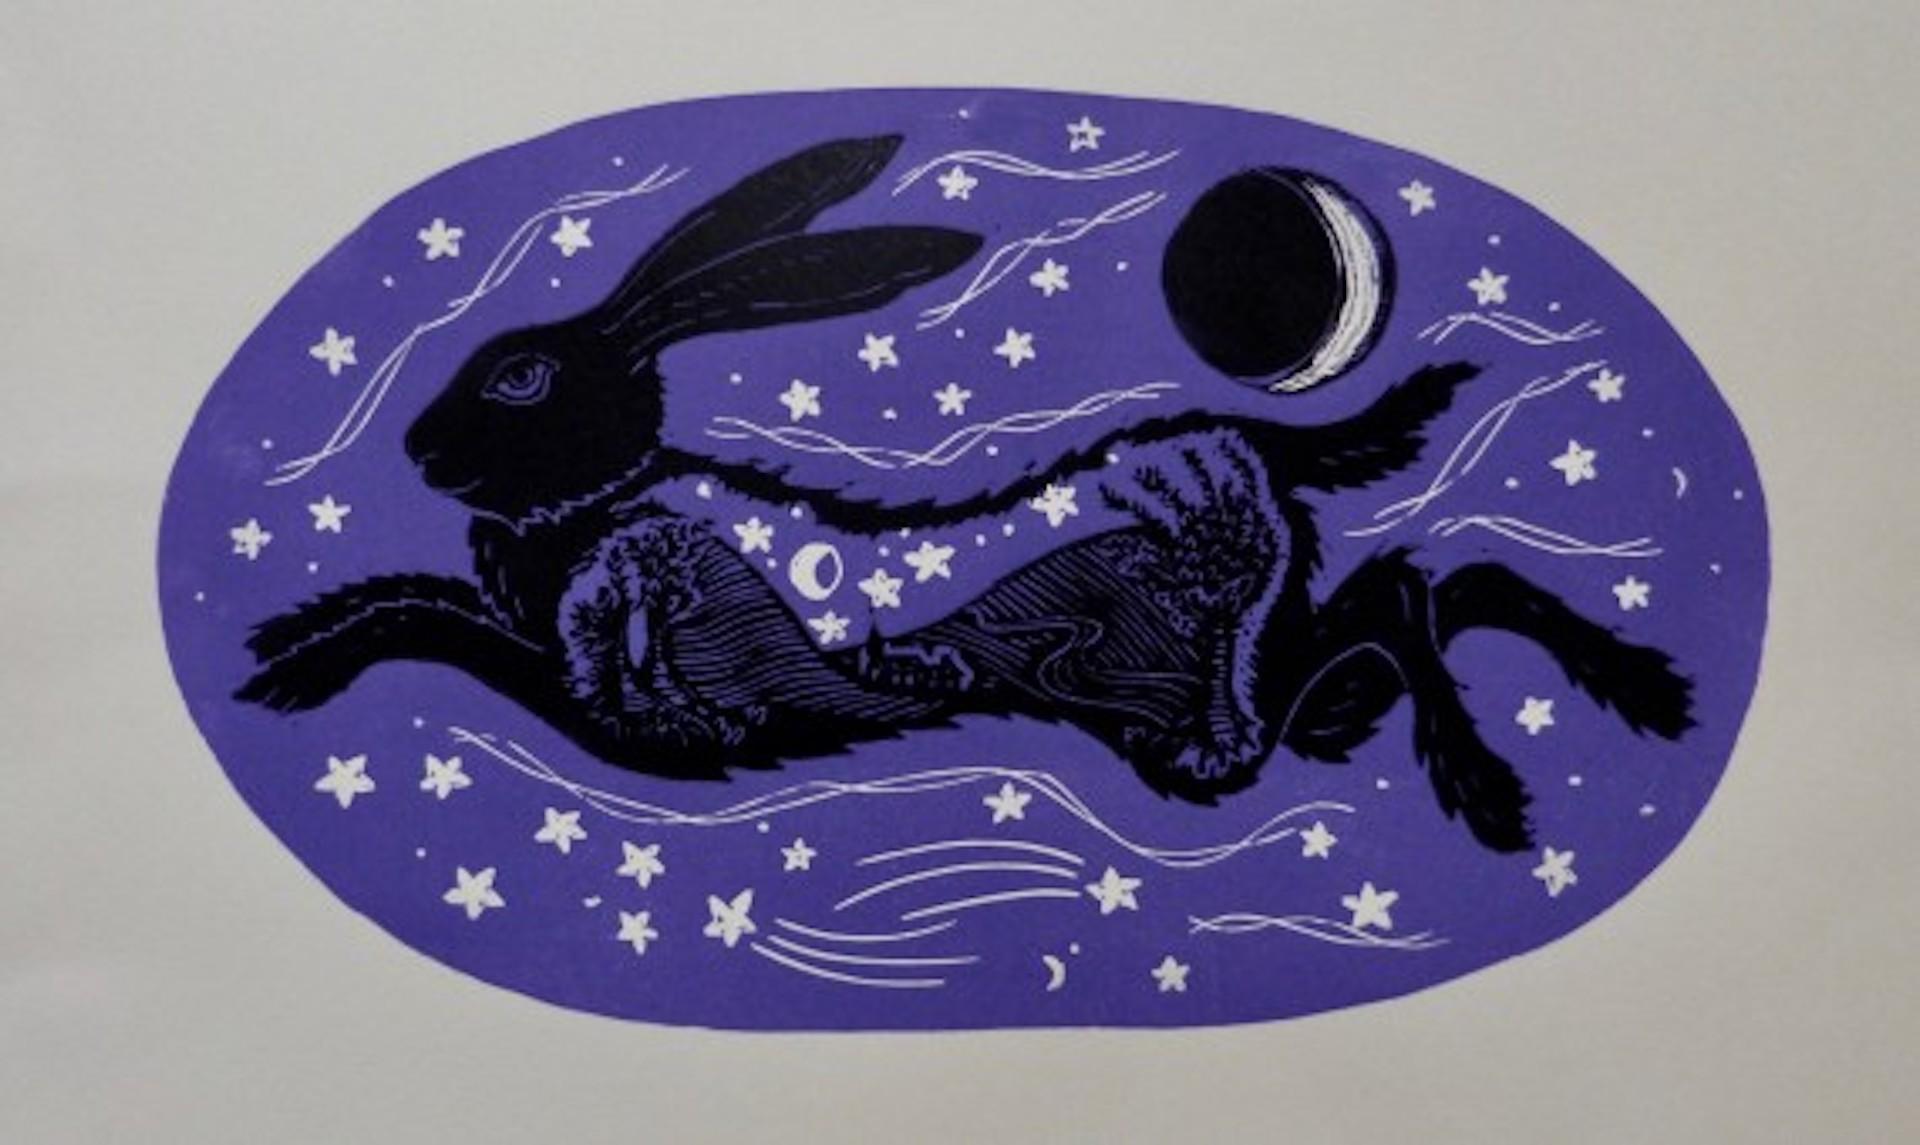 Leaping Hare, Kate Willows, édition limitée, Astrology, Animal, Stars, Sky